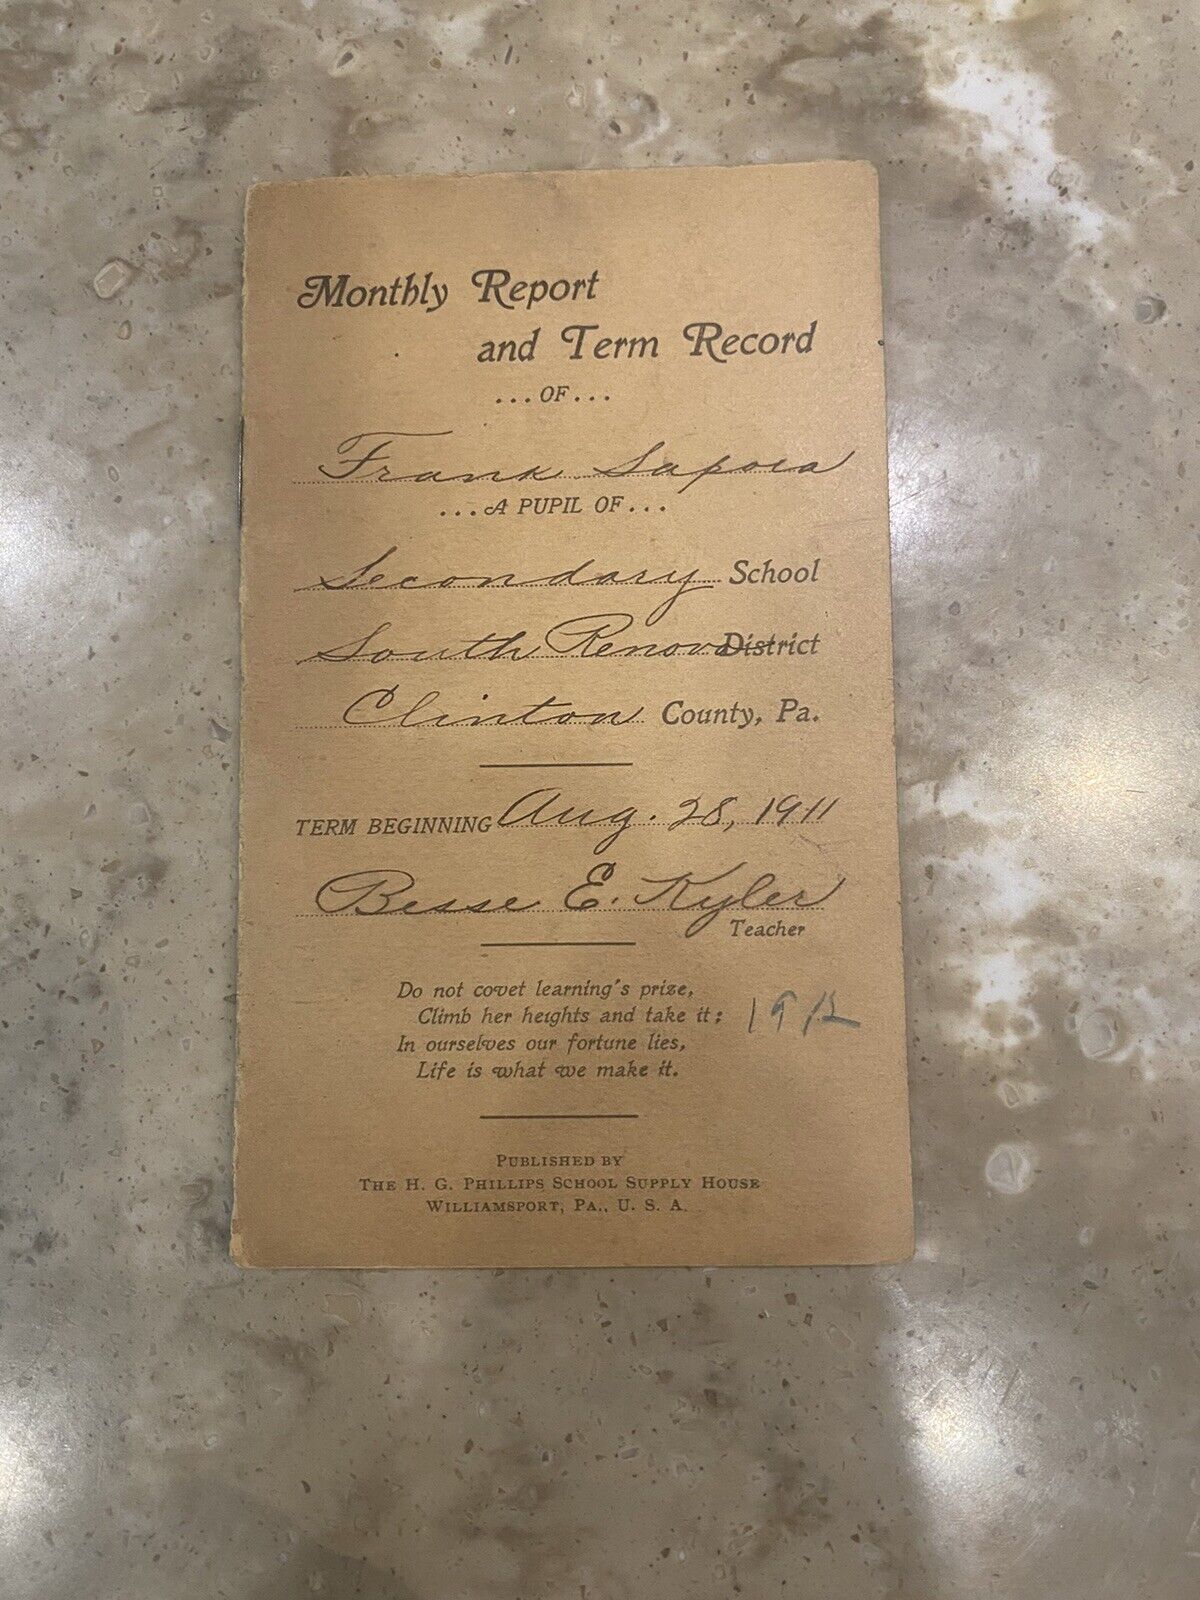 Clinton County, Pa. 1911 Monthly report card Secondary School